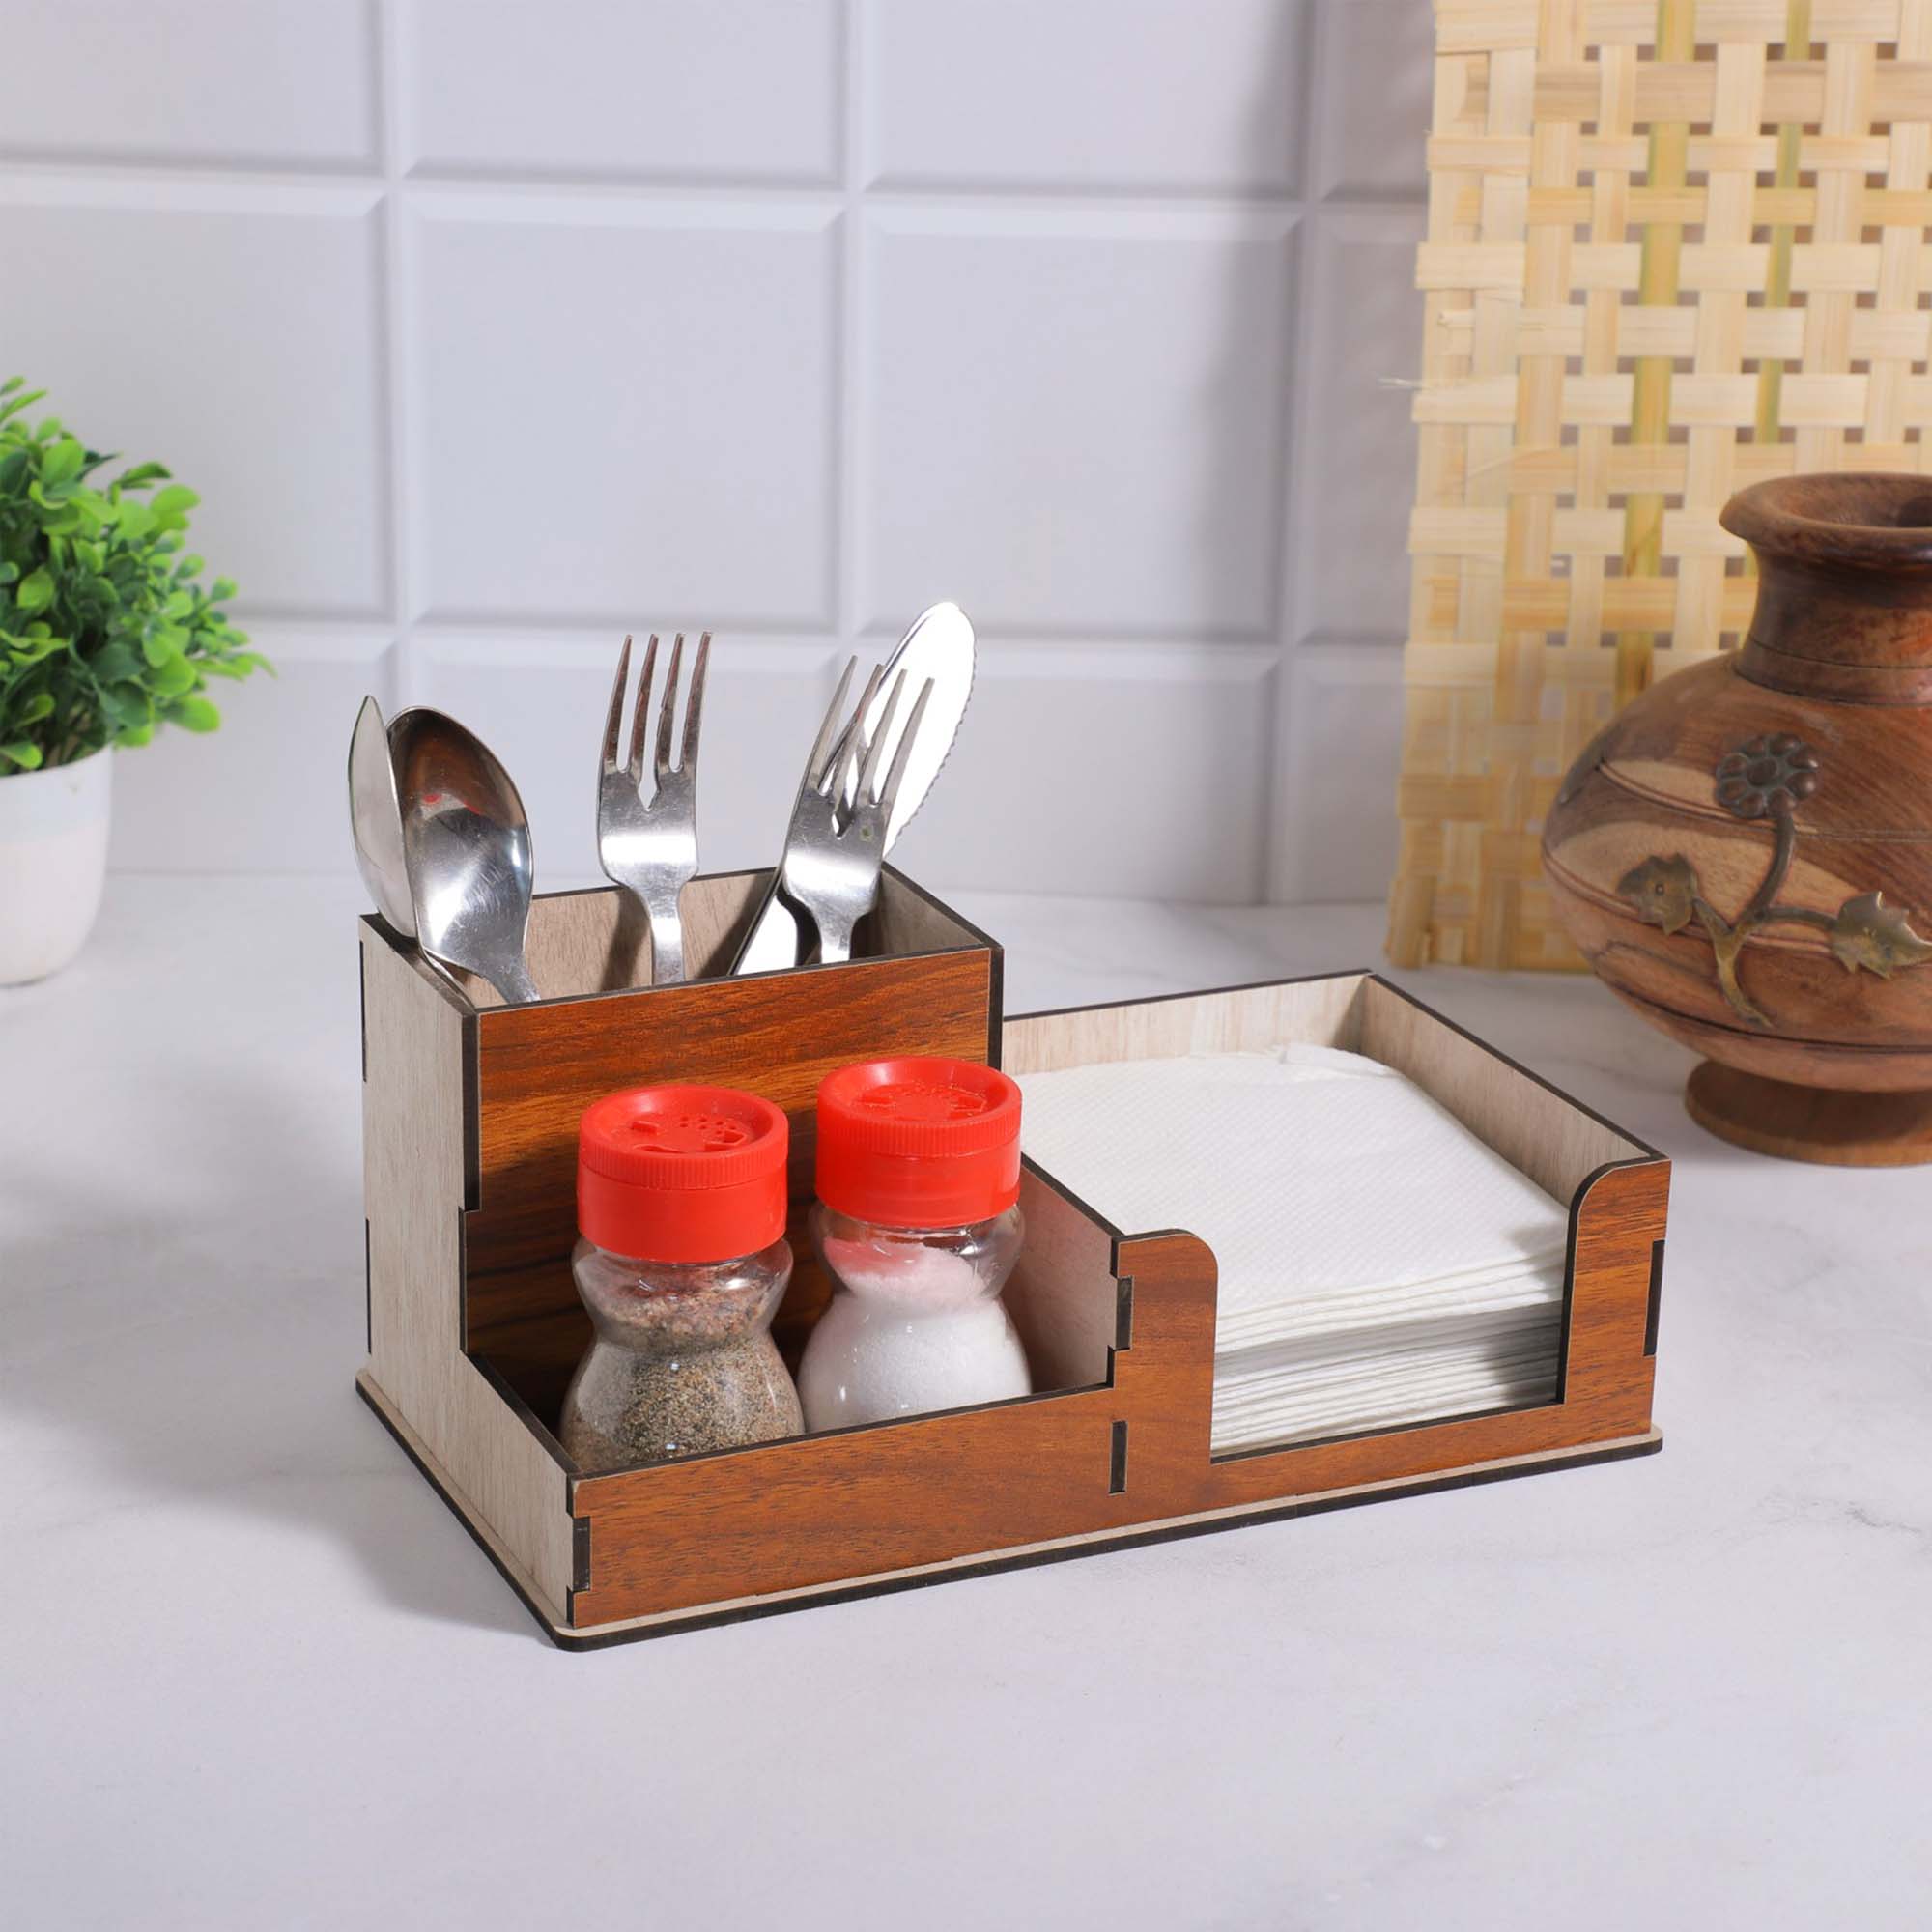 Kitchen Cutlery Holder with Spoon, Fork, Knife, Salt, Pepper and Tissue Paper Holder for Kitchen Dining Table, Resturant and Cafe